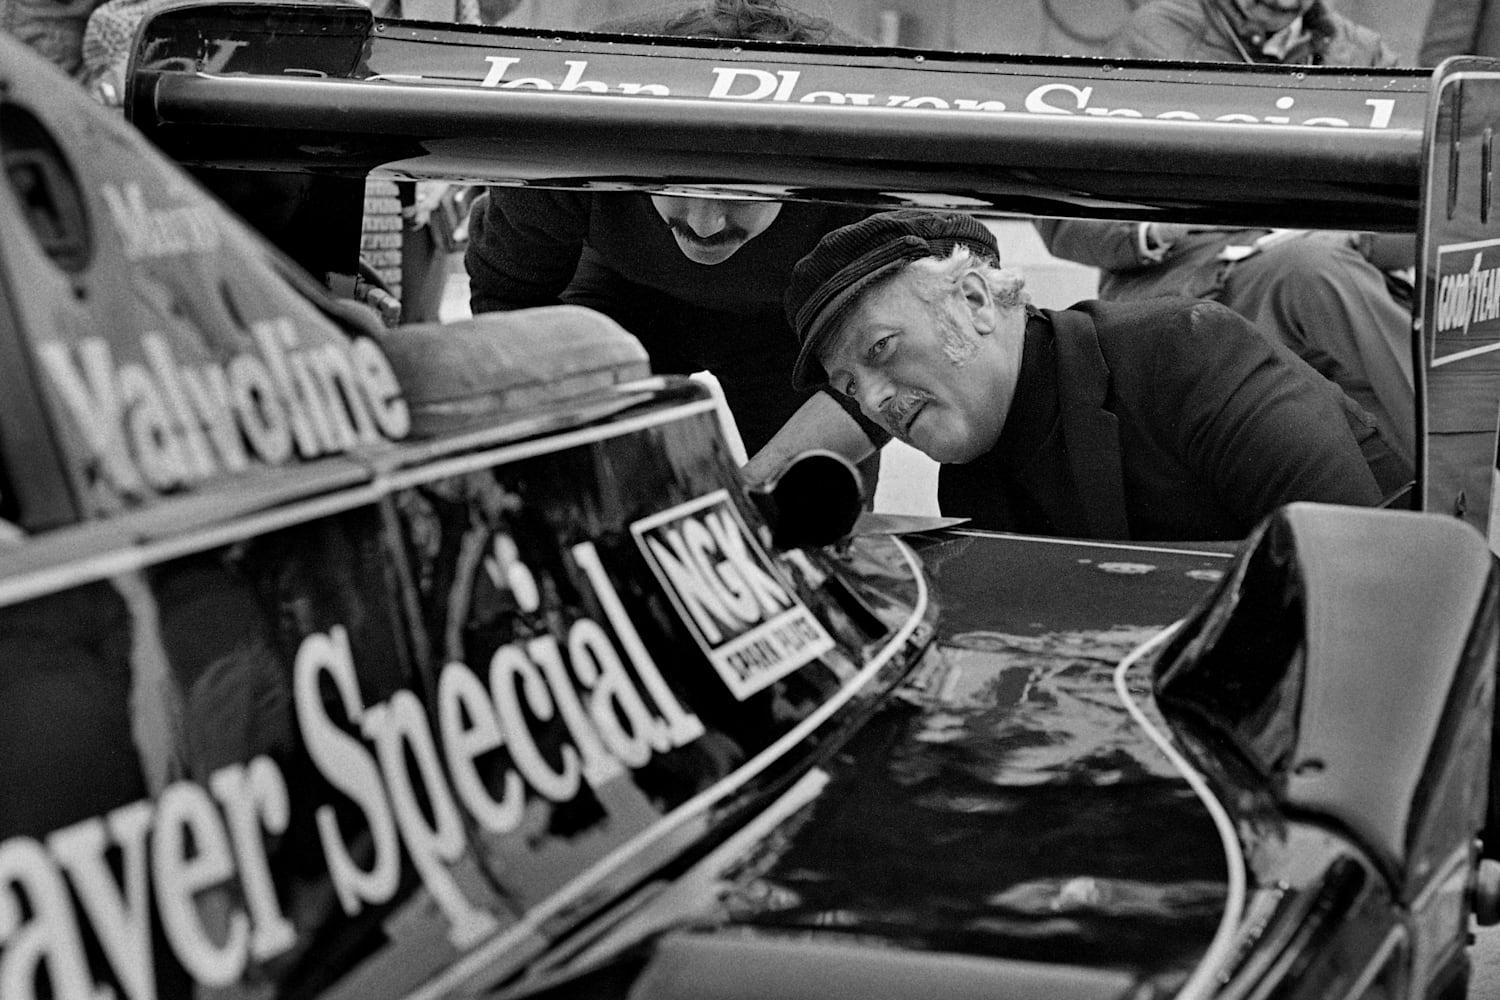 Colin Chapman inspects the back of Andretti’s Lotus 79/R3 Ford Cosworth DFV.